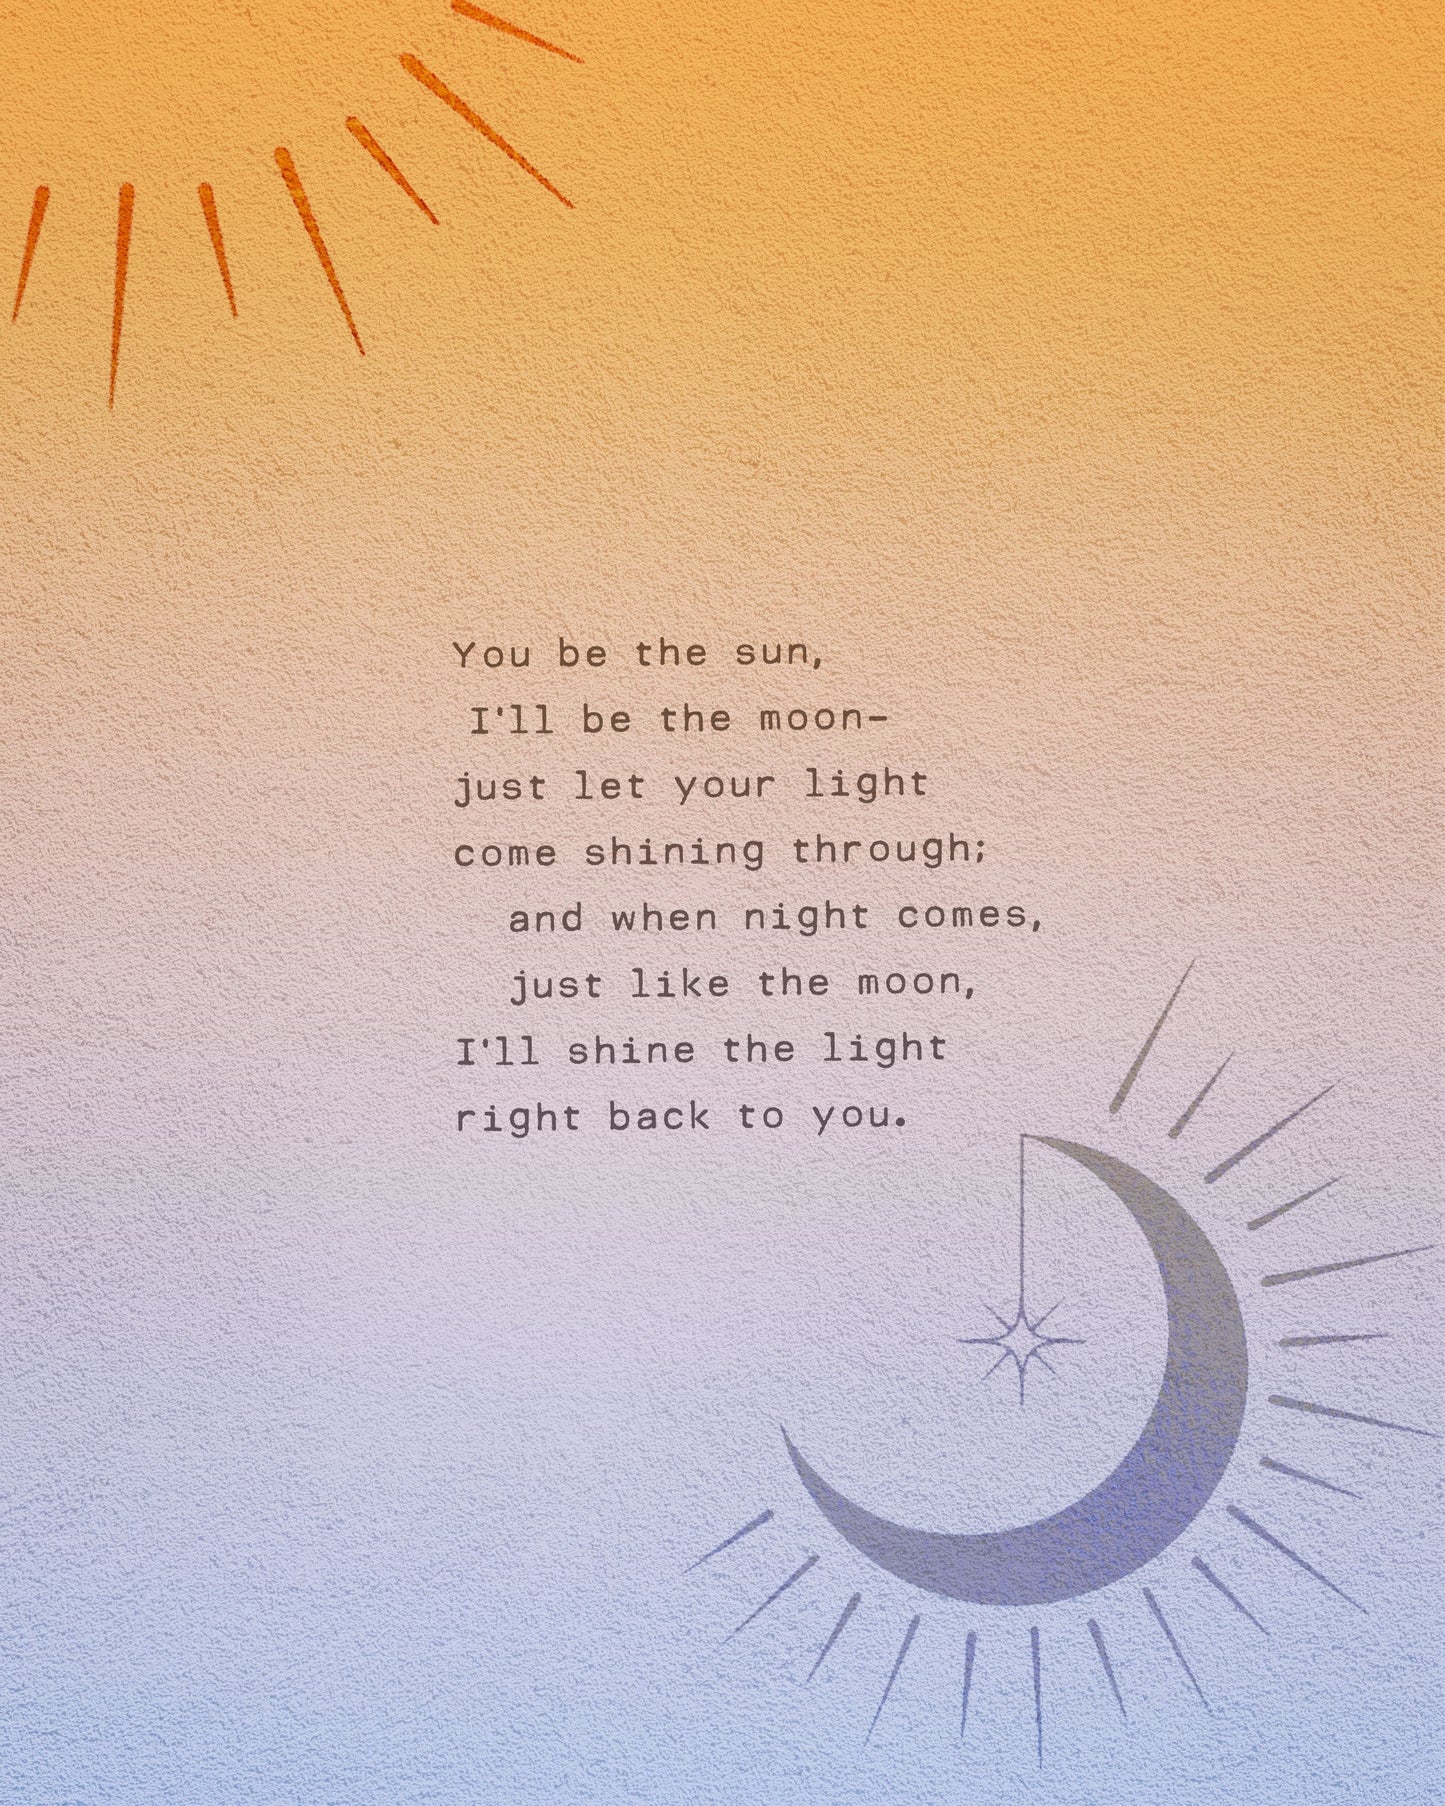 Love poem "You be the sun, I'll be the moon"